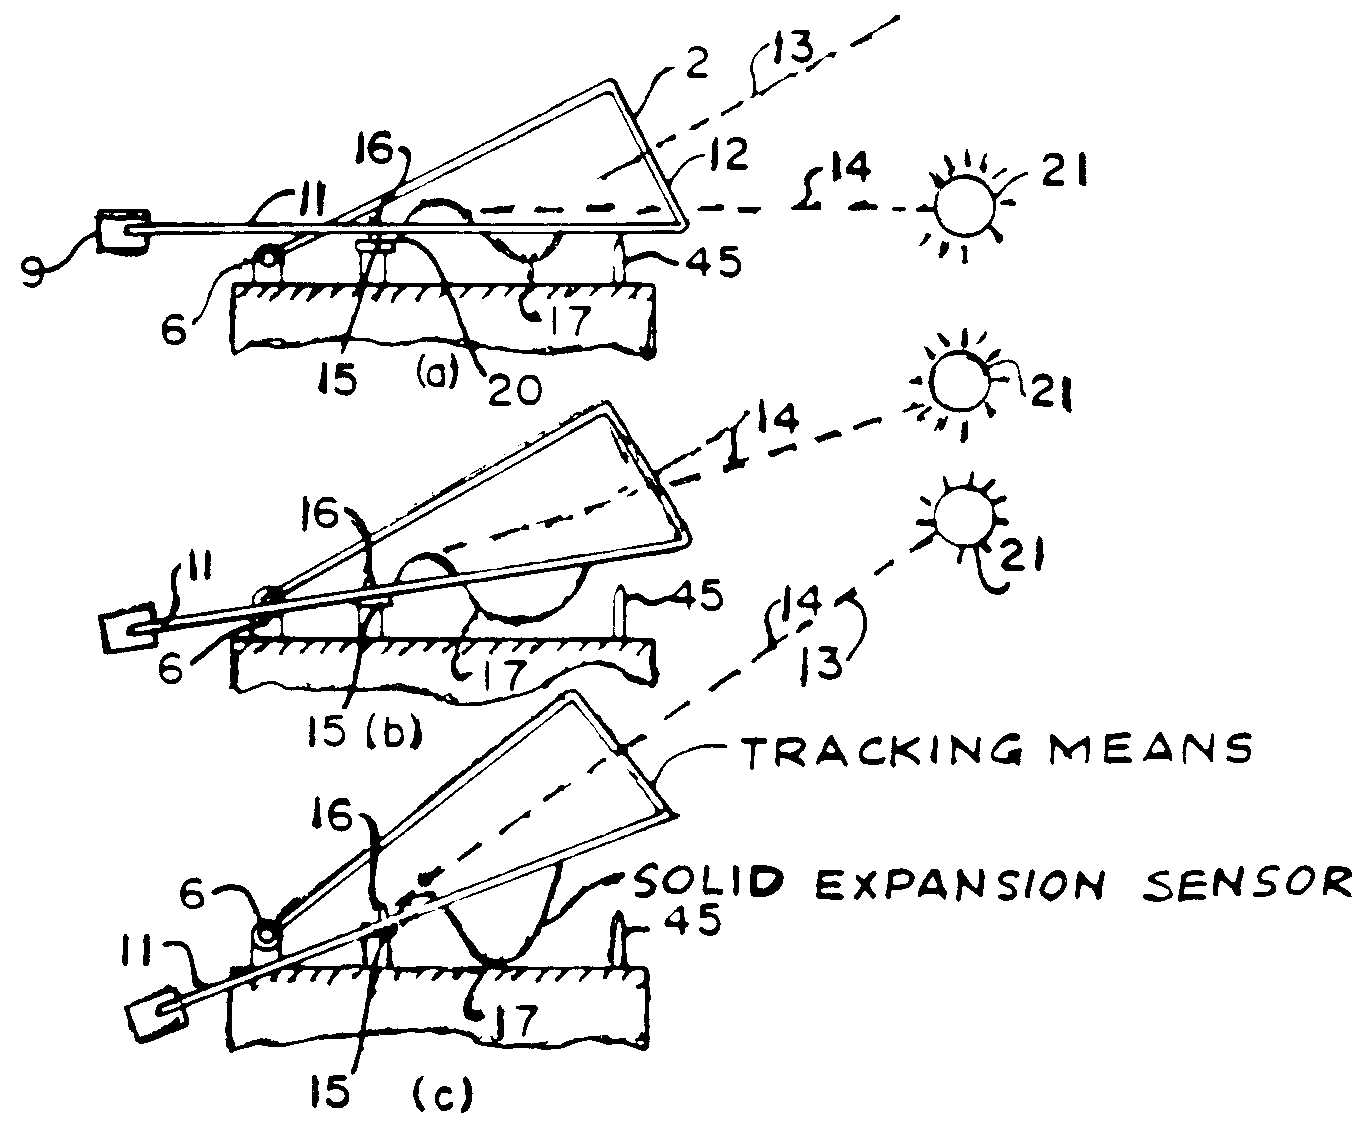 A solar energy conversion device is provided with simplifiedmeans for tracking a source of solar energy.  In the preferred embodiment,the tracking means is a predeterminedly shaped, heat expandabledevice operatively connected to an energy concentrator.  The energy concentratoris movably mounted and is adapted to direct concentrated energyeither towards a suitable energy conversion means in those positionsin which the concentration is aligned with respect to the solarenergy source, or towards the expandable device in those positionsin which the concentrator is misaligned with respect to the solarenergy source.  Application of concentrated solar energy to theexpandable device causes its expansion, which expansion is utilizedto move the concentrator into alignment with the energy source. At alignment, concentrated energy is directed from the expandabledevice toward the energy conversion means.
